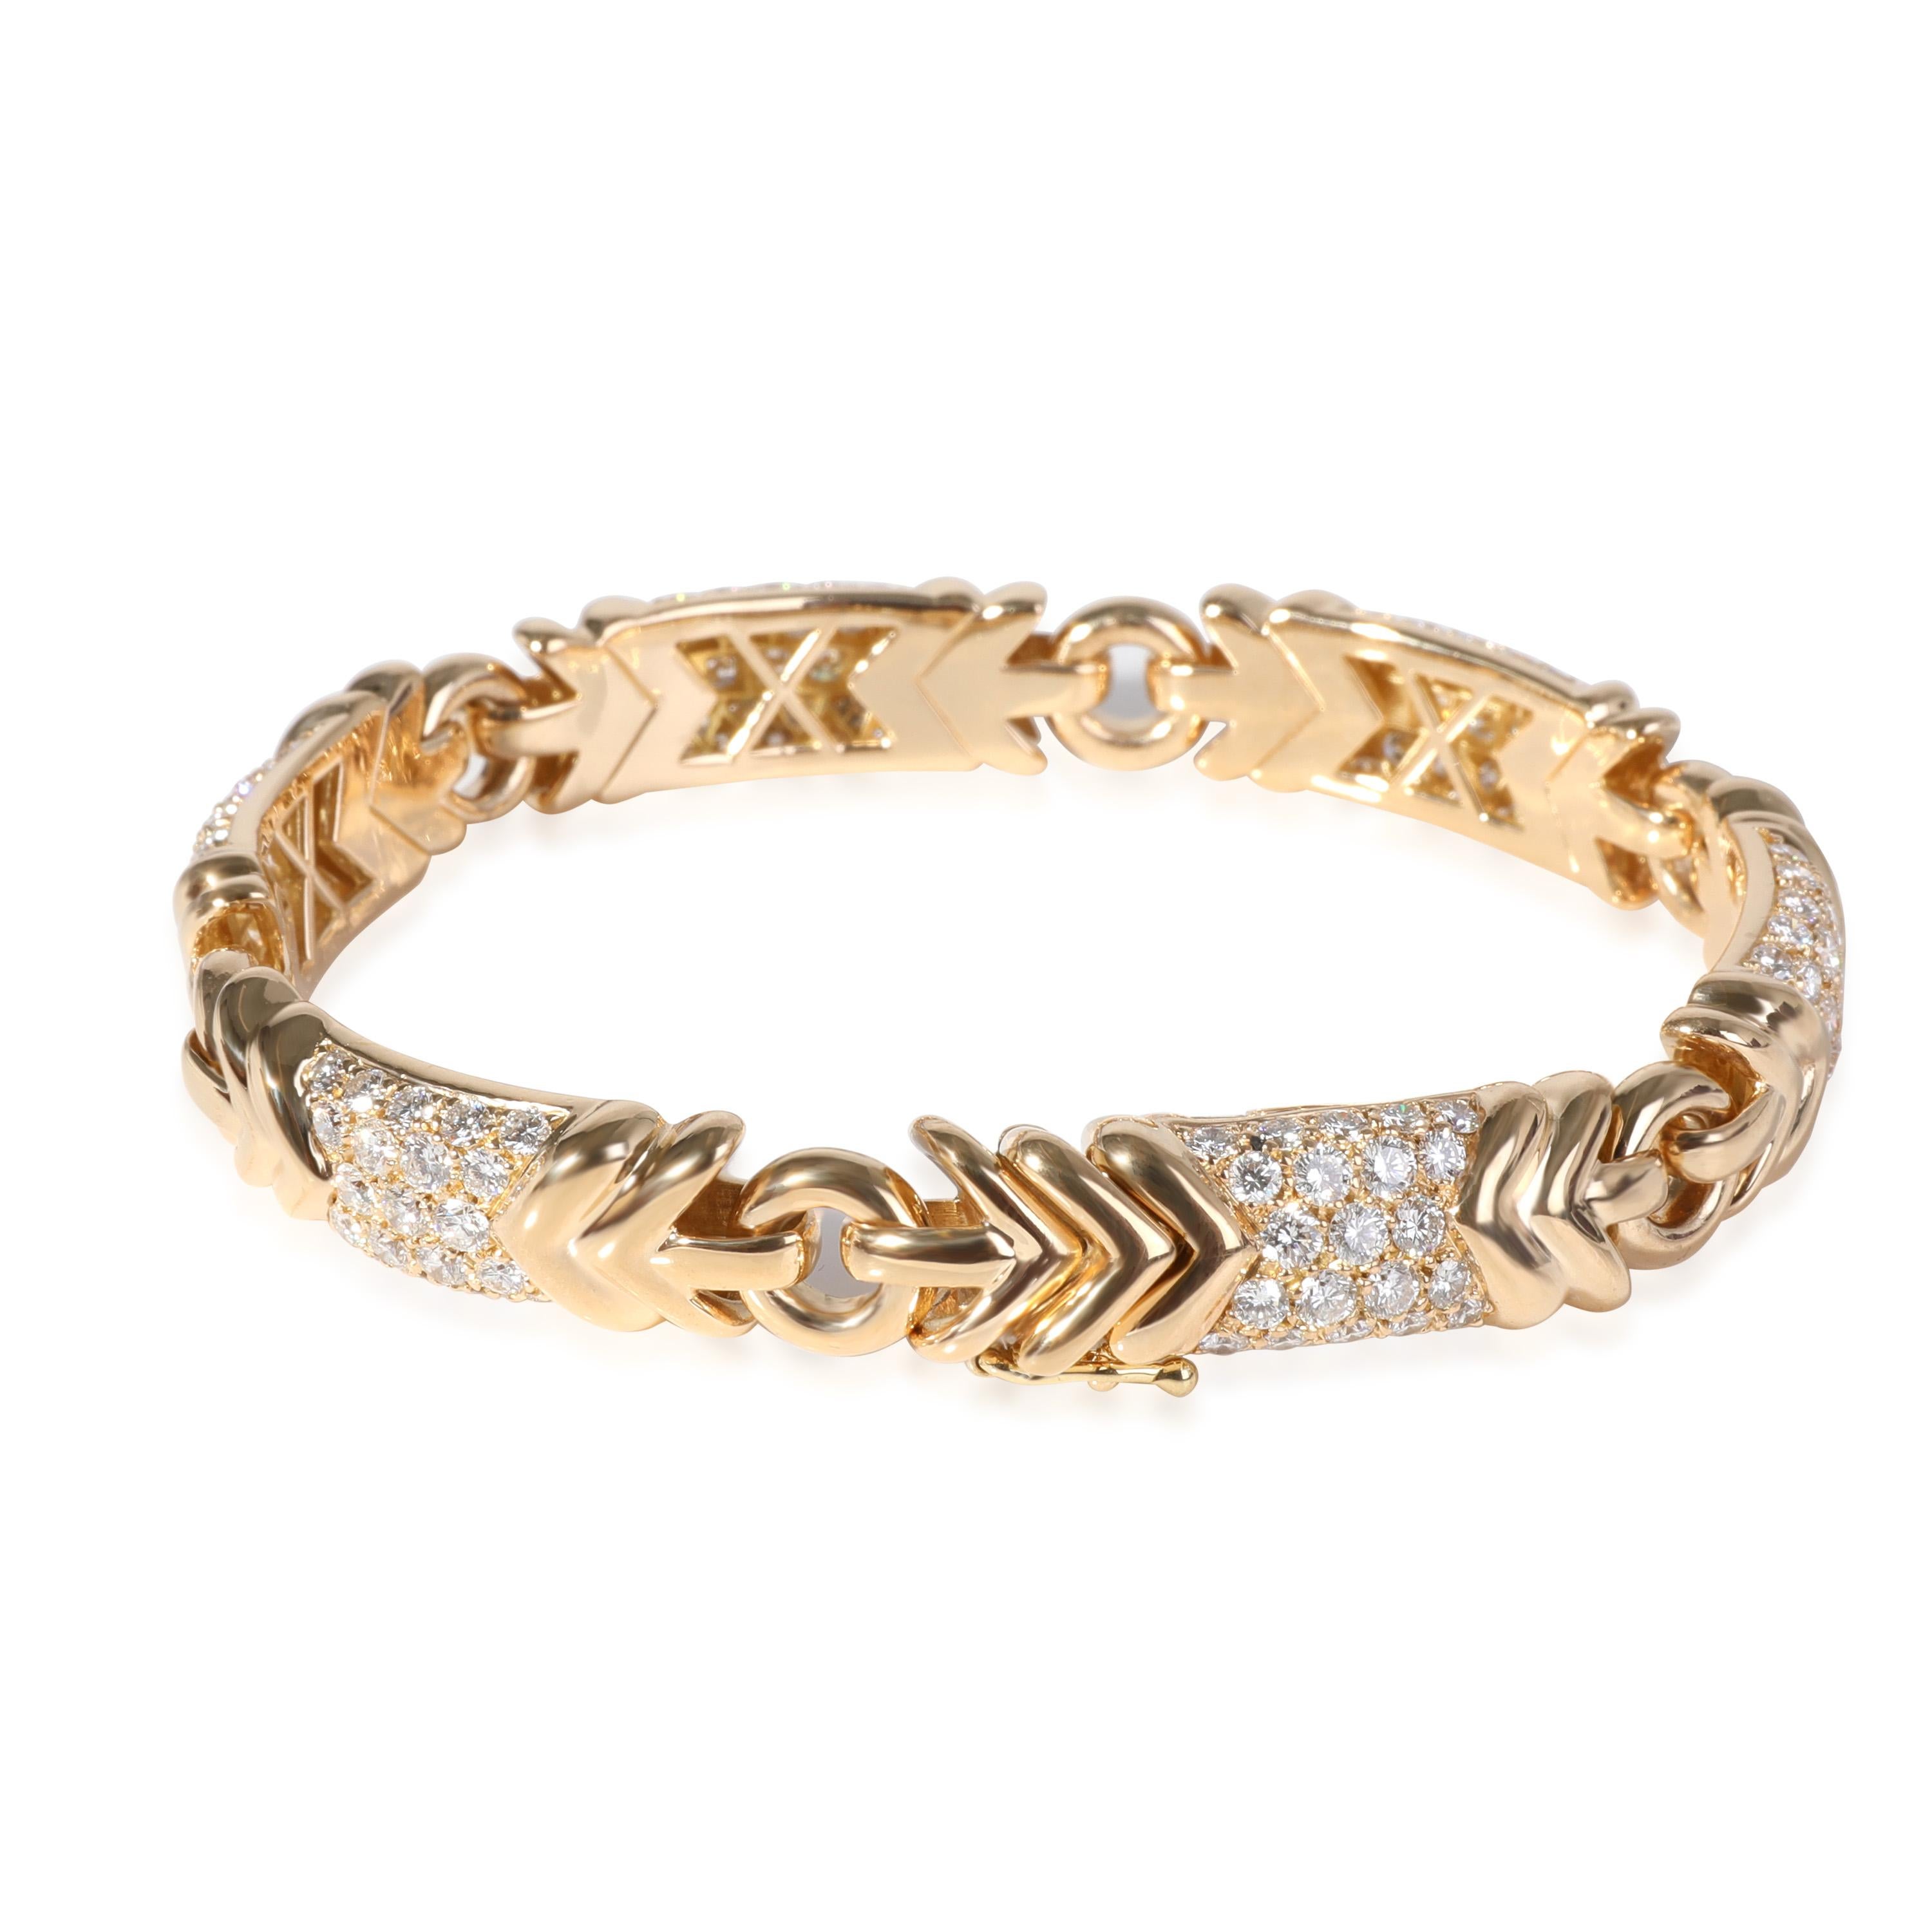 Bulgari Diamond Bracelet in 18k Yellow Gold 4.89 CTW

PRIMARY DETAILS
SKU: 118775
Listing Title: Bulgari Diamond Bracelet in 18k Yellow Gold 4.89 CTW
Condition Description: Retails for 30,000 USD. In excellent condition and recently polished. 7.25